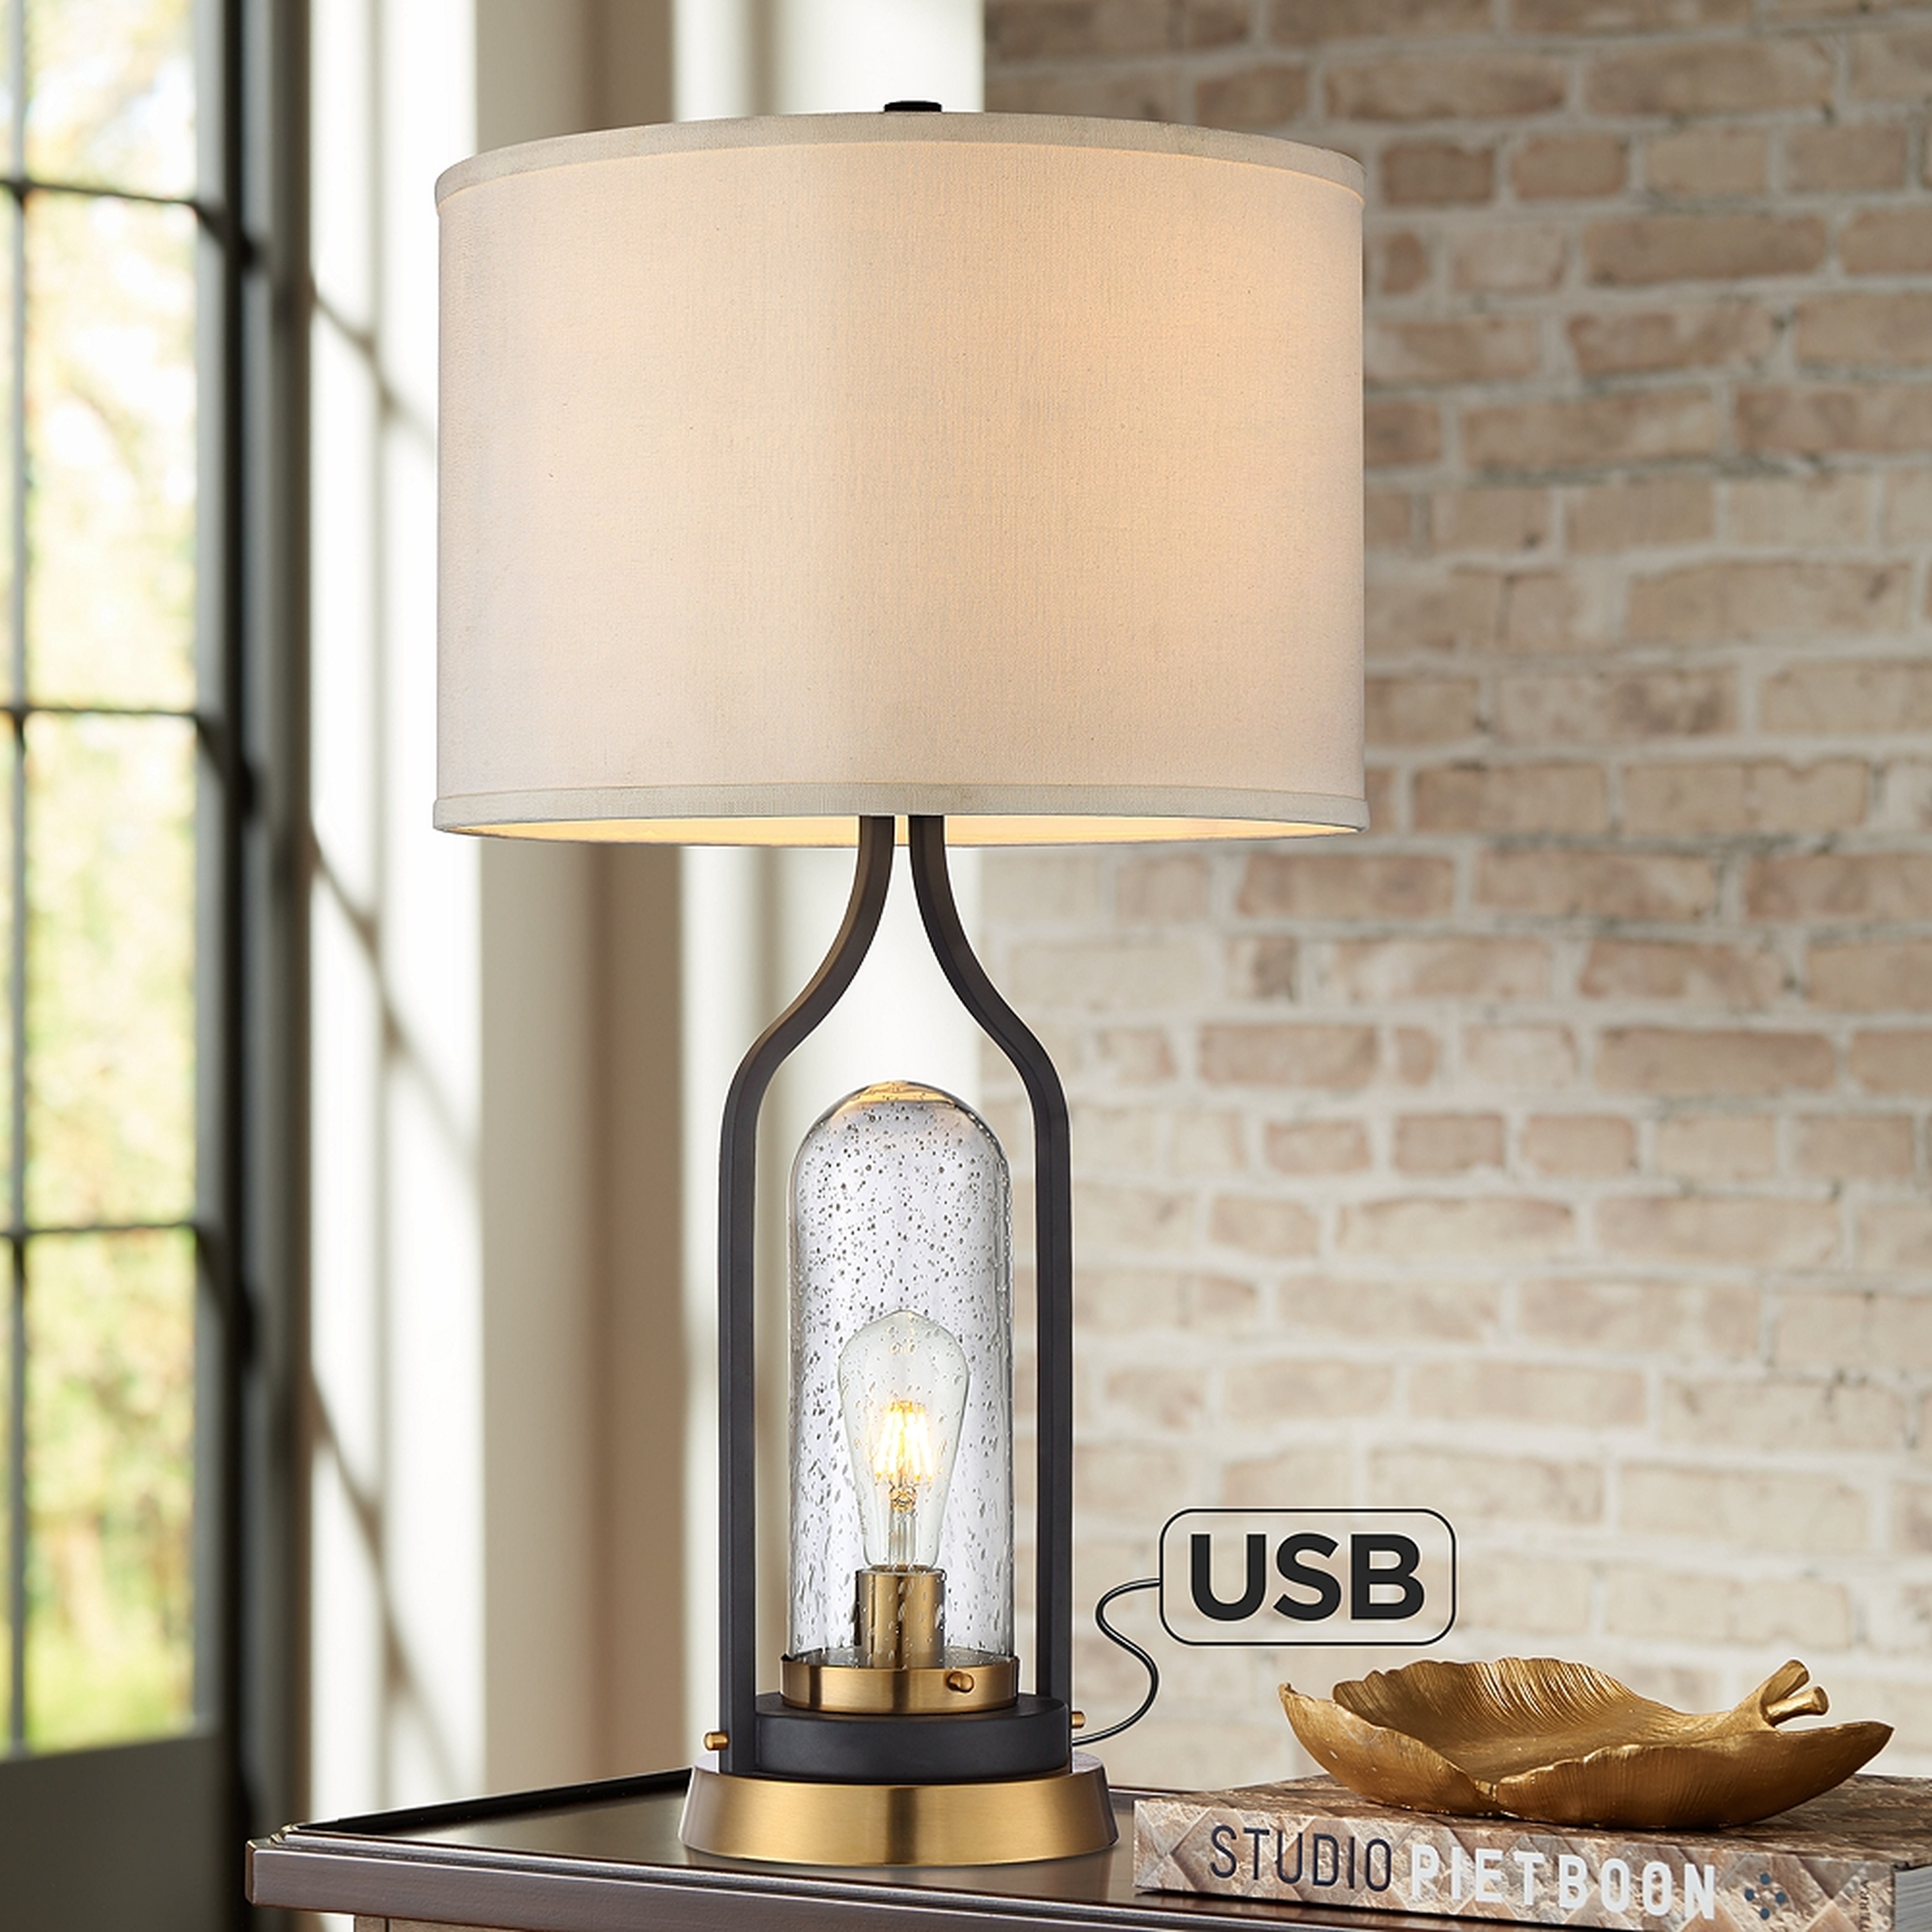 Parker Bronze Farmhouse USB Table Lamp with LED Night Light - Style # 80N28 - Lamps Plus